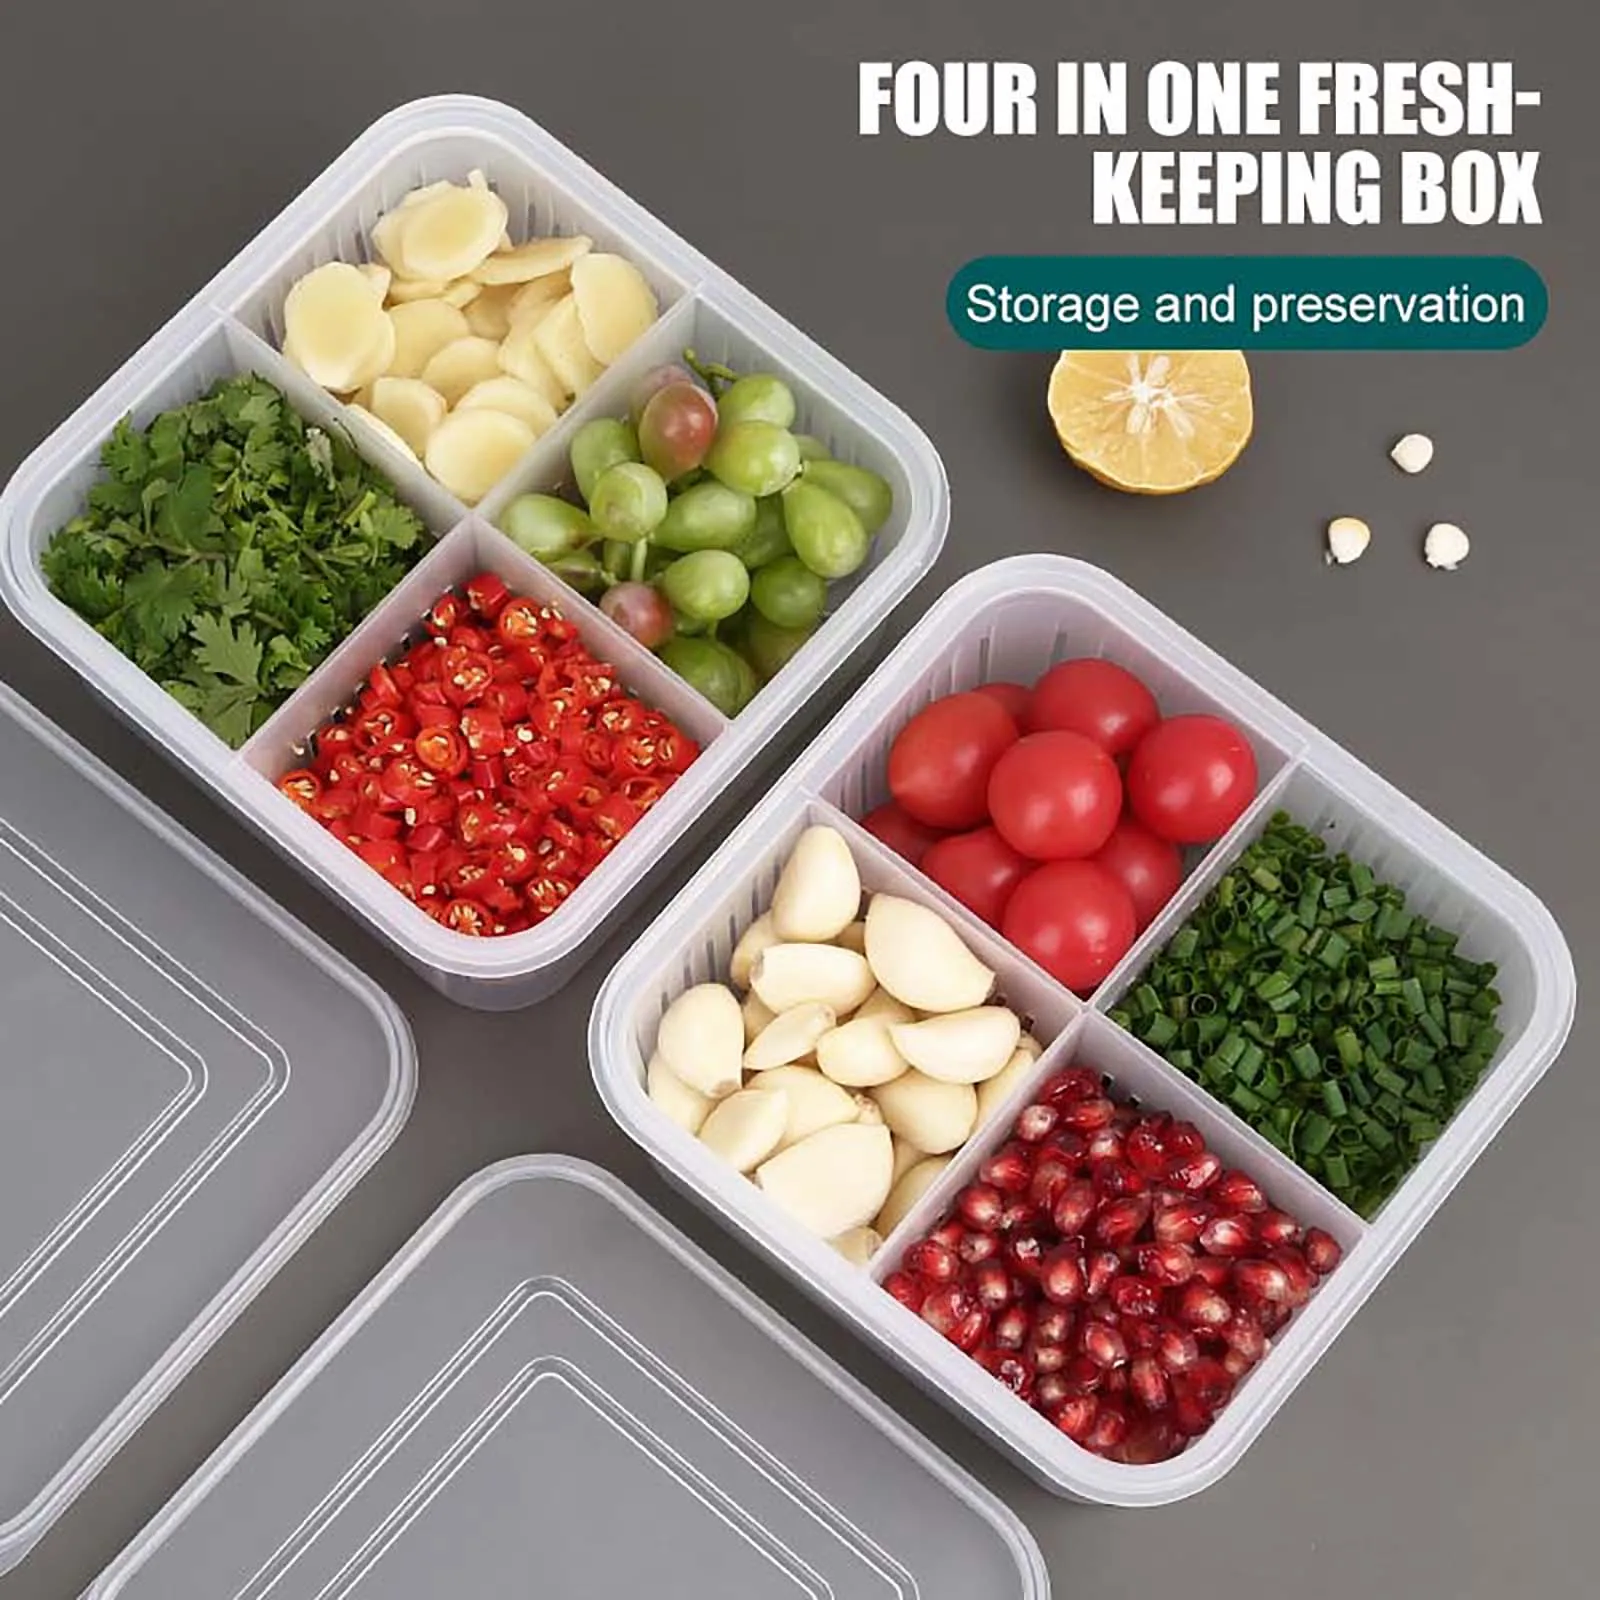 https://ae01.alicdn.com/kf/Sc11edd6842e844048959f080d2f78f15c/Refrigerator-Separate-Food-Storage-Containers-with-Lid-Seal-Fresh-Box-Organizer-Vegetables-Containers-for-Kitchen.jpg